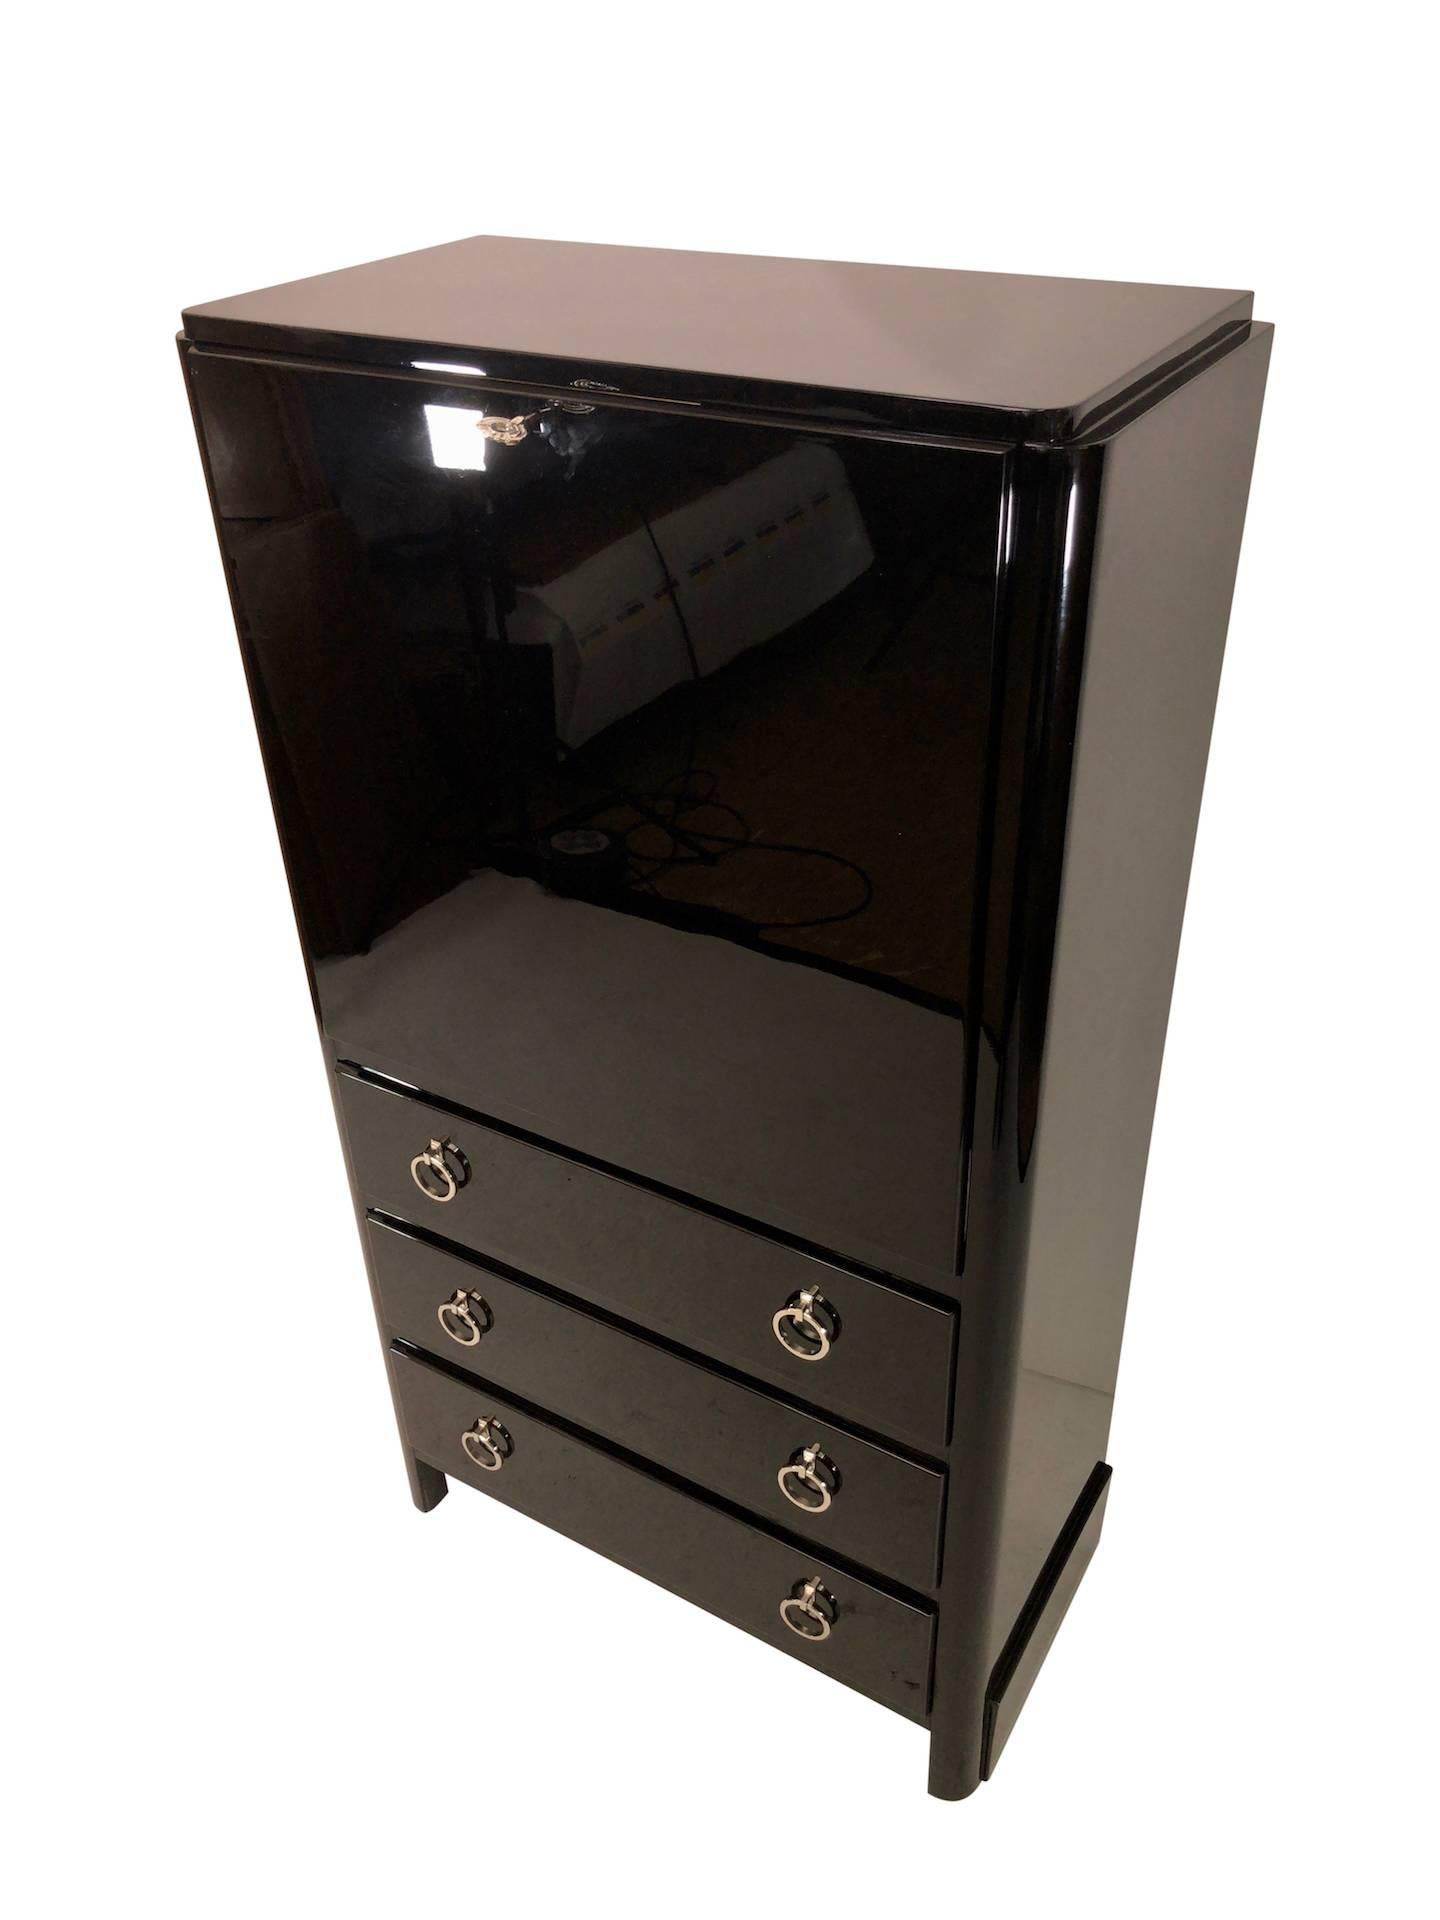 20th Century Strong 1930s French Art Deco Bureau in Black Lacquer with Drawers